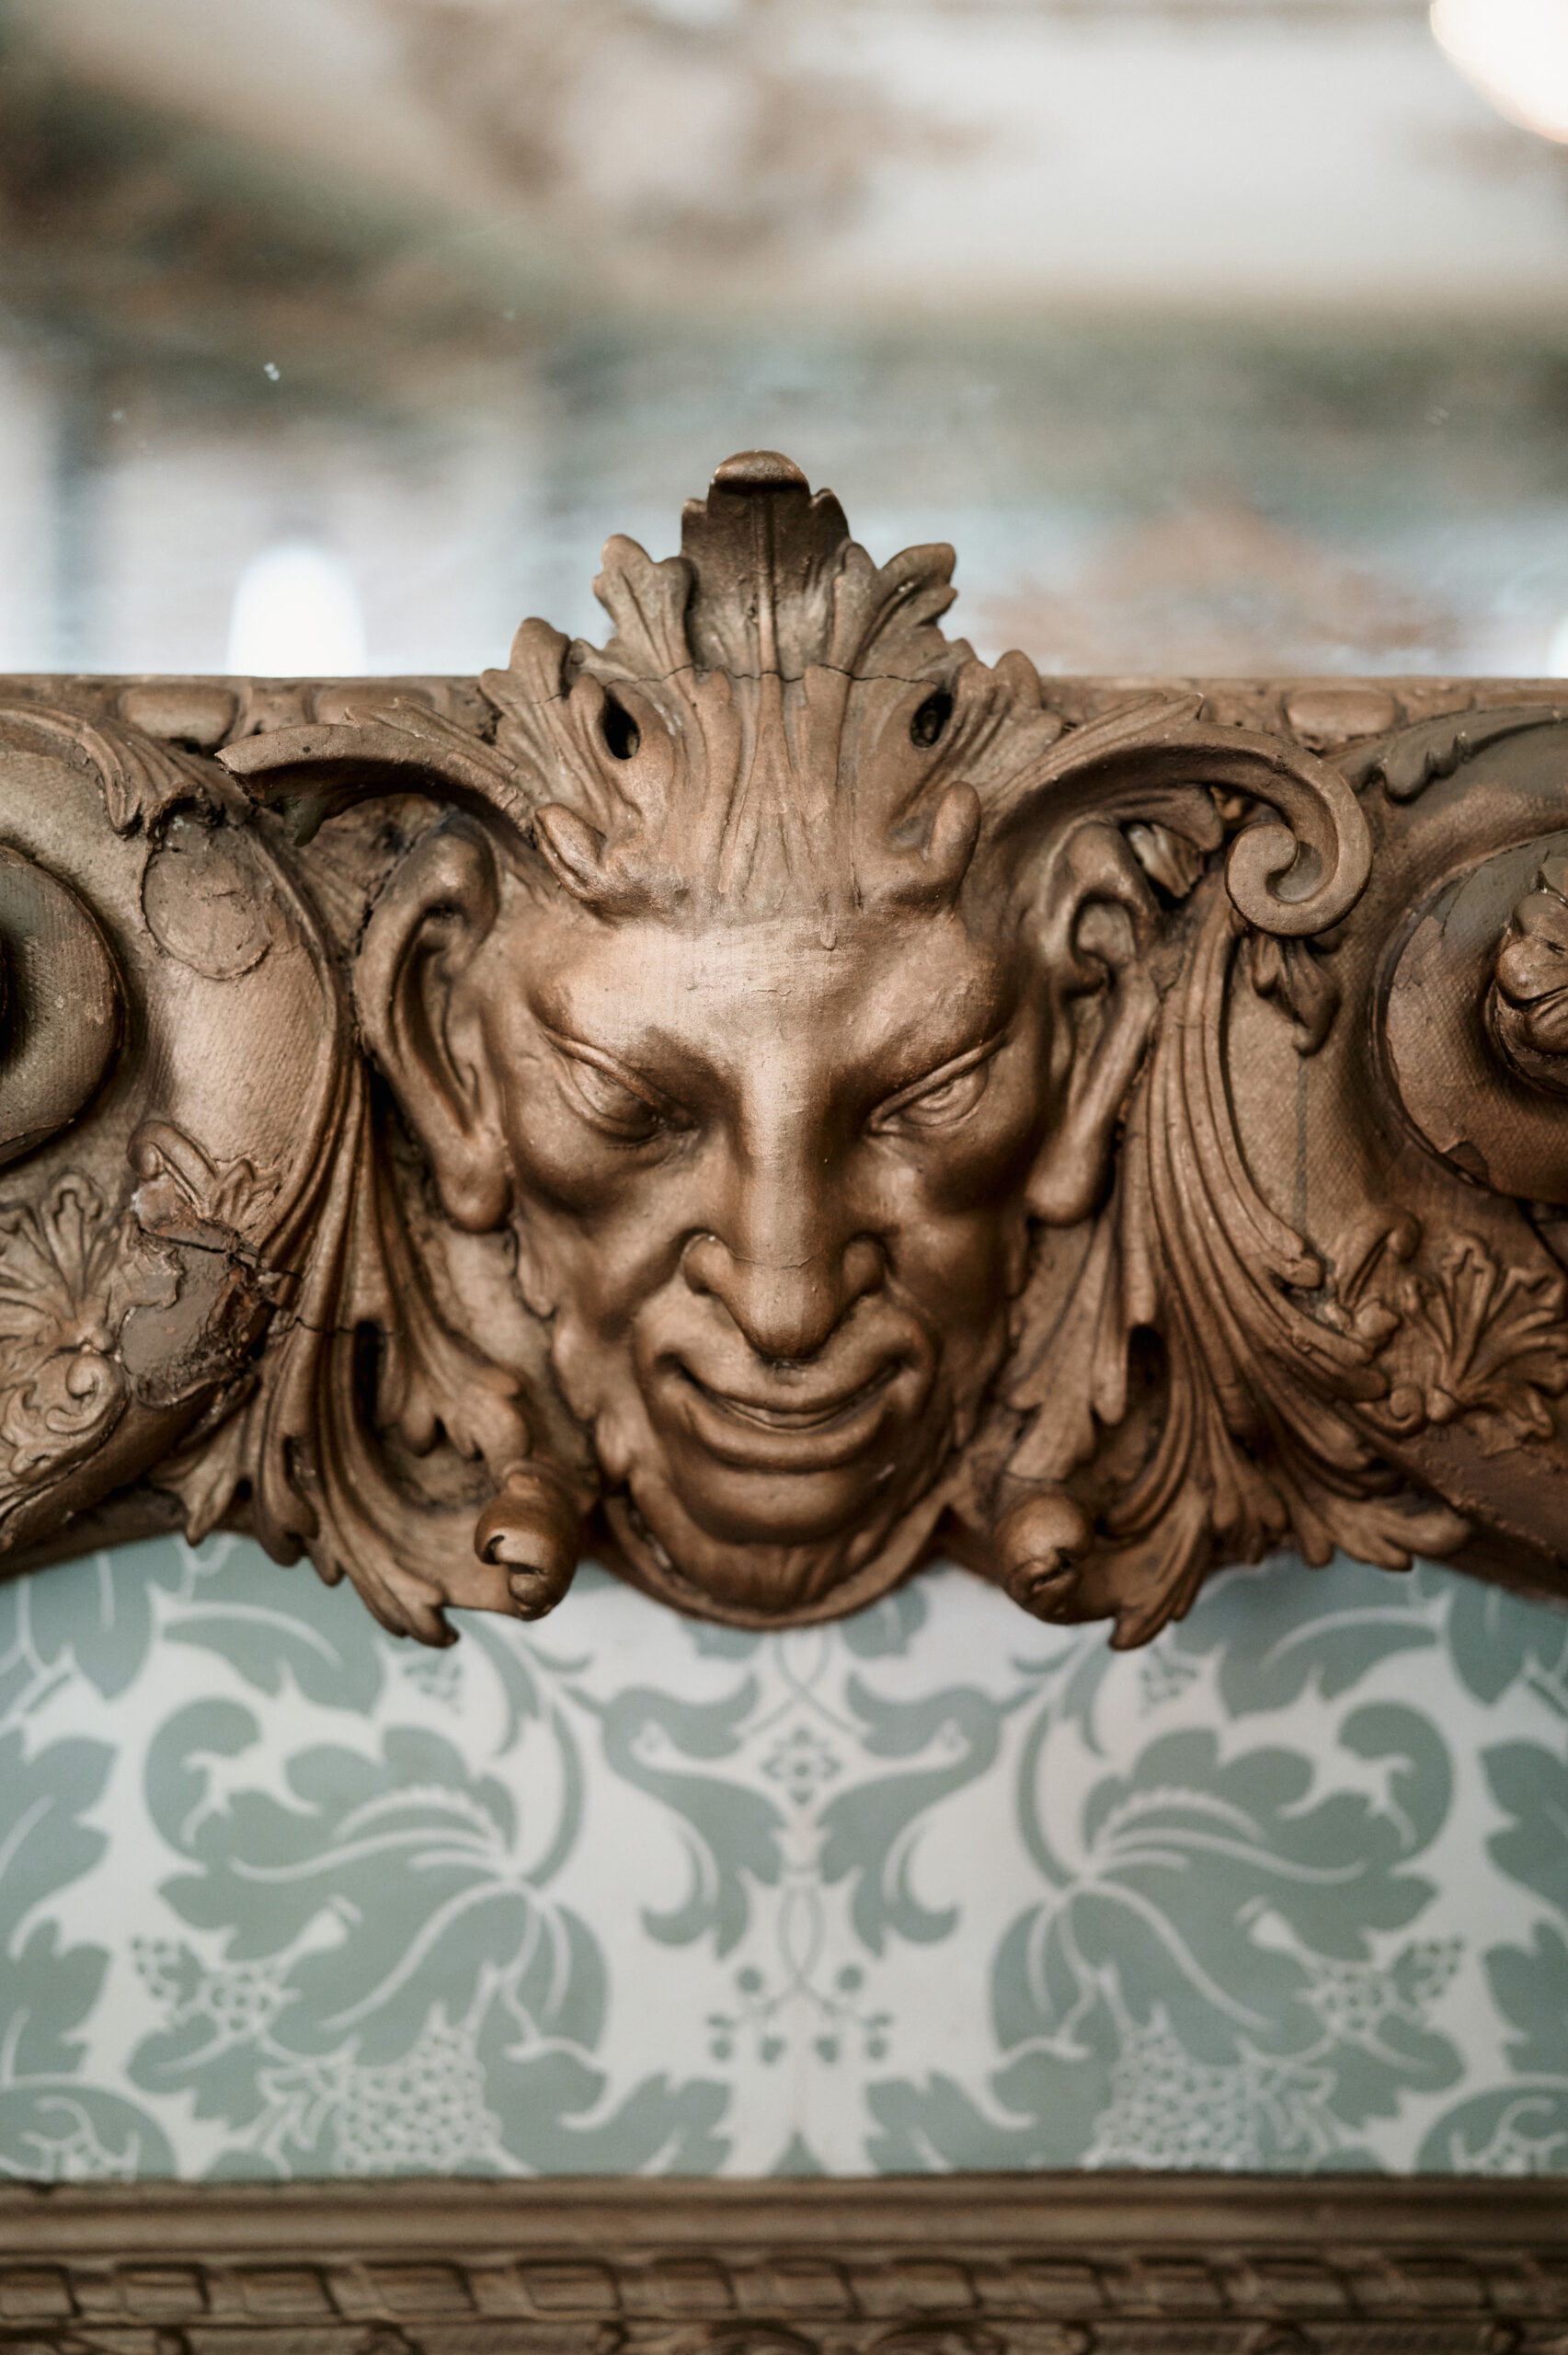 A fancy carved face on a wall.